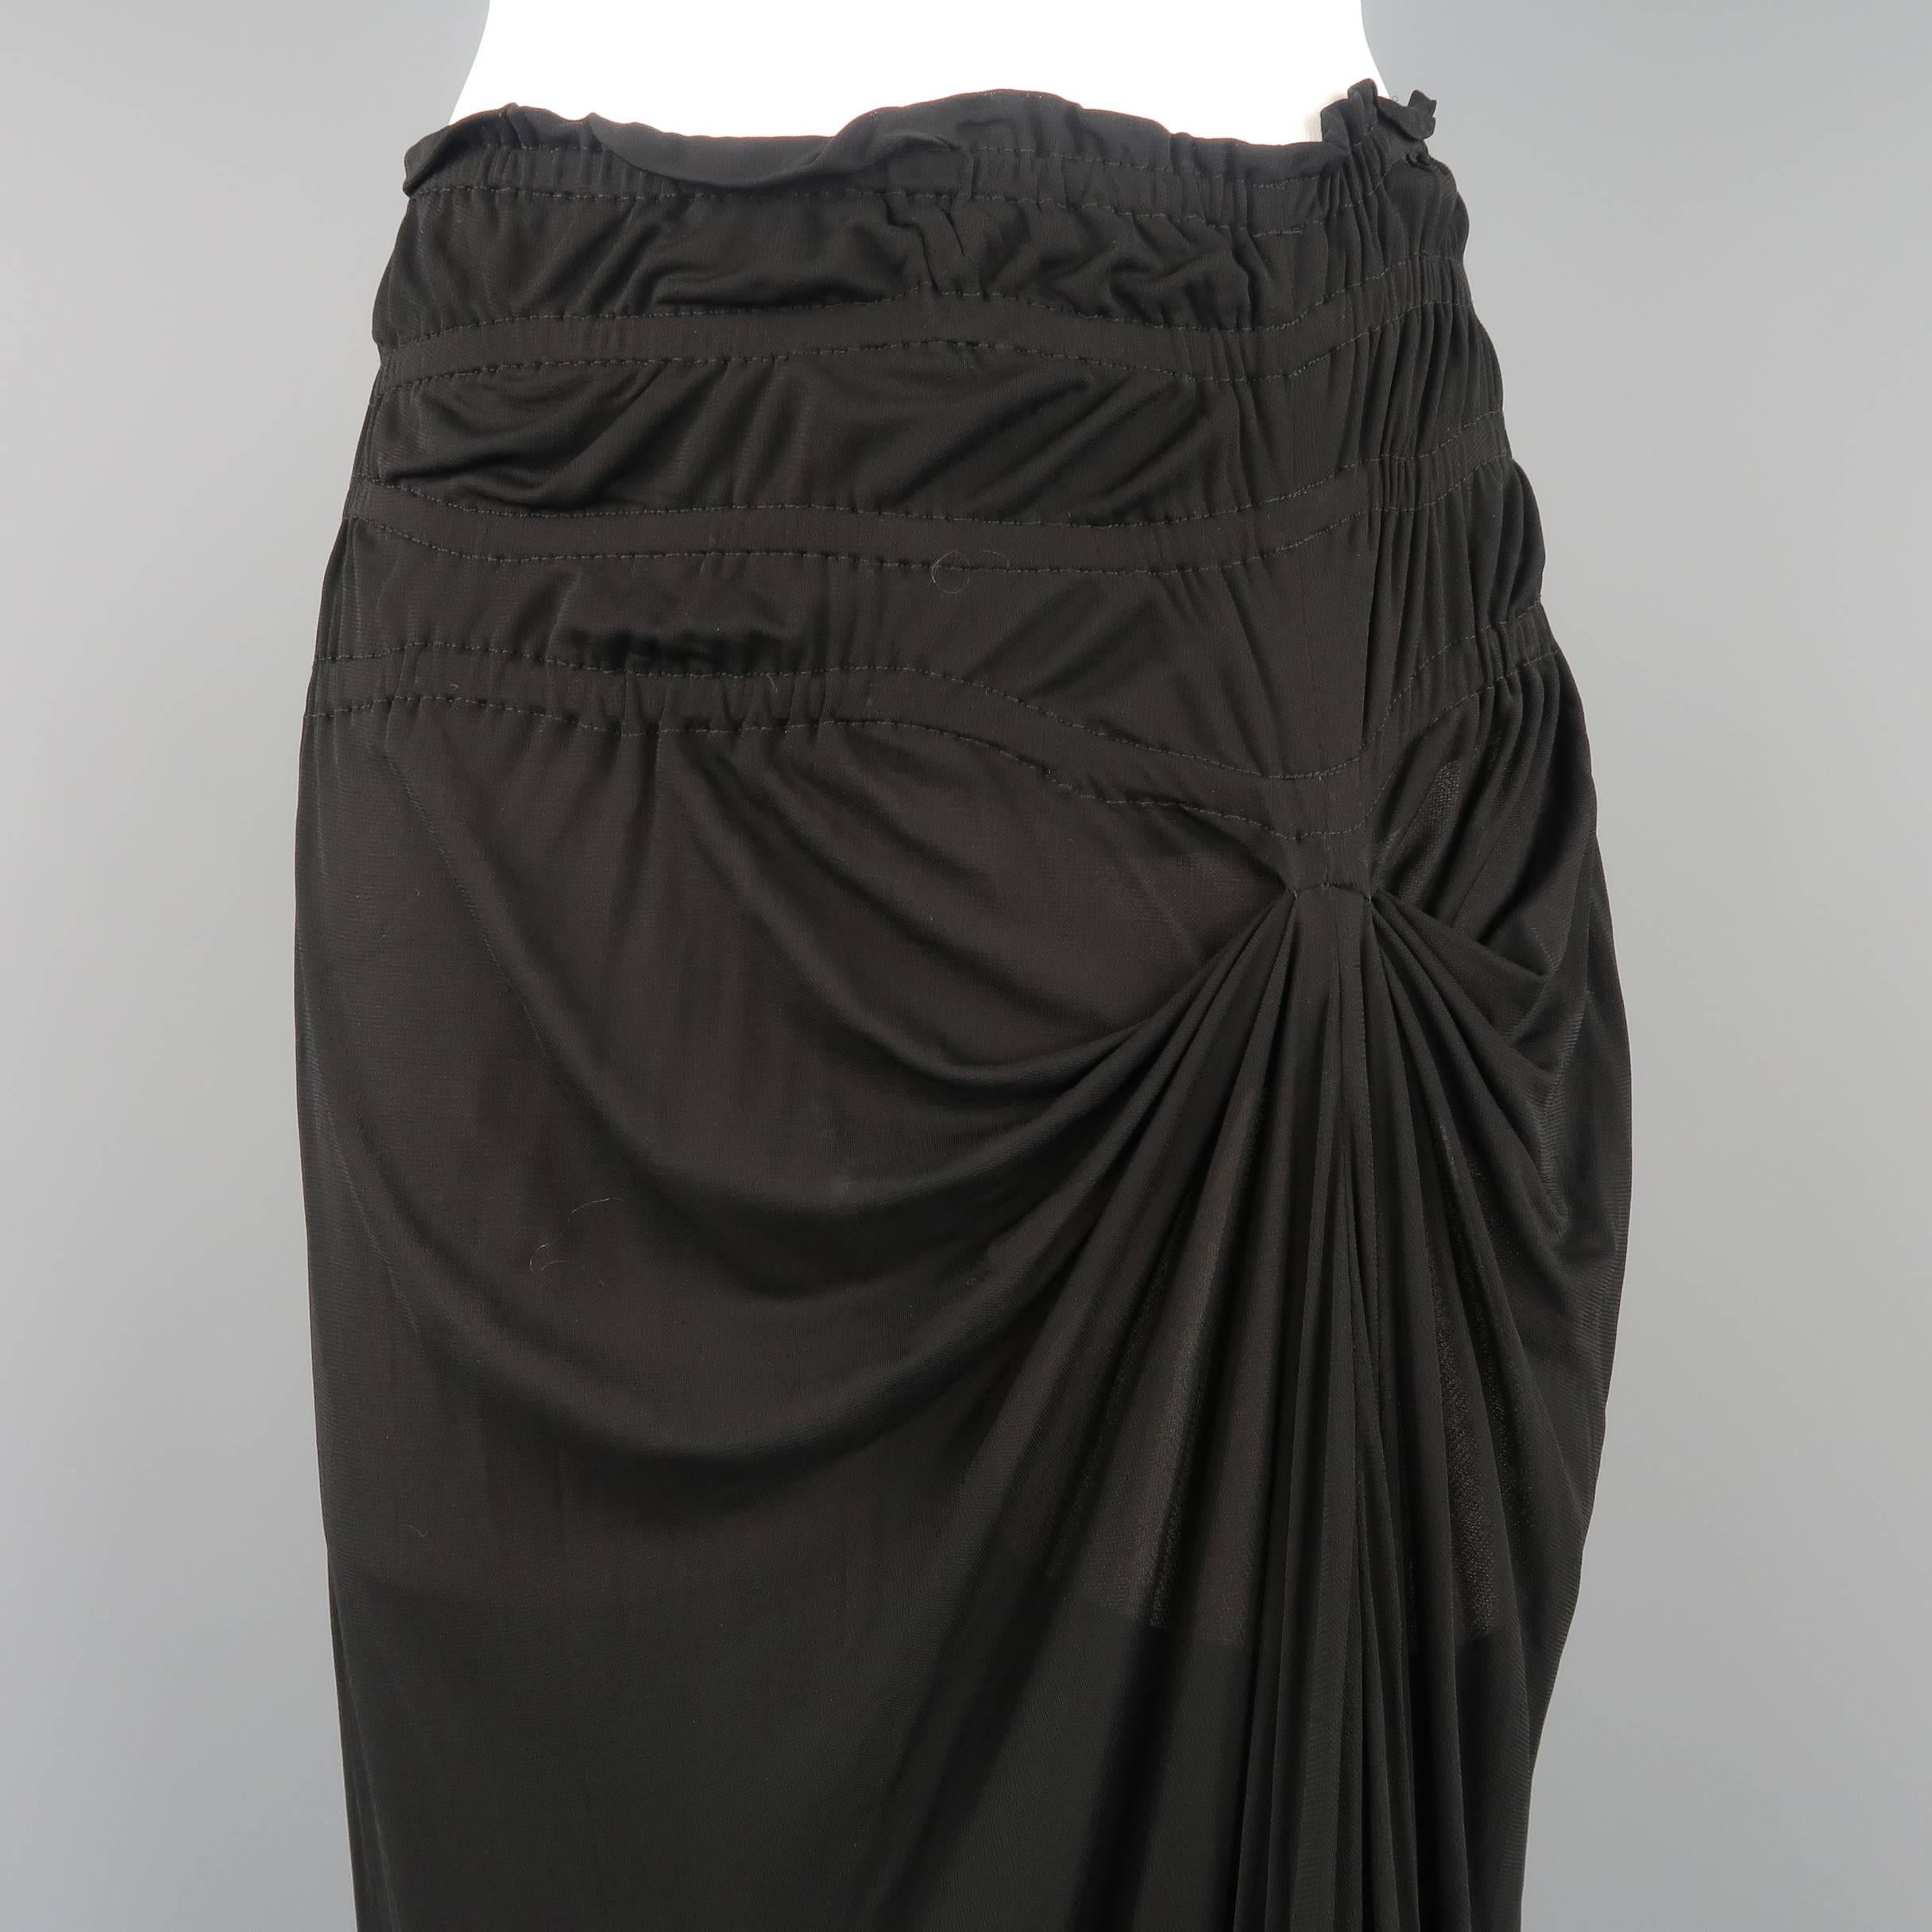 YVES SAINT LAURENT by TOM FORD midi skirt comes in soft, flowy viscose chiffon with a gathered waist, elastic ruffle gathered hem, and asymmetrical draped slit side. Look 29 of Fall Winter 2001 Collection. Made in Italy.
 
Excellent Pre-Owned